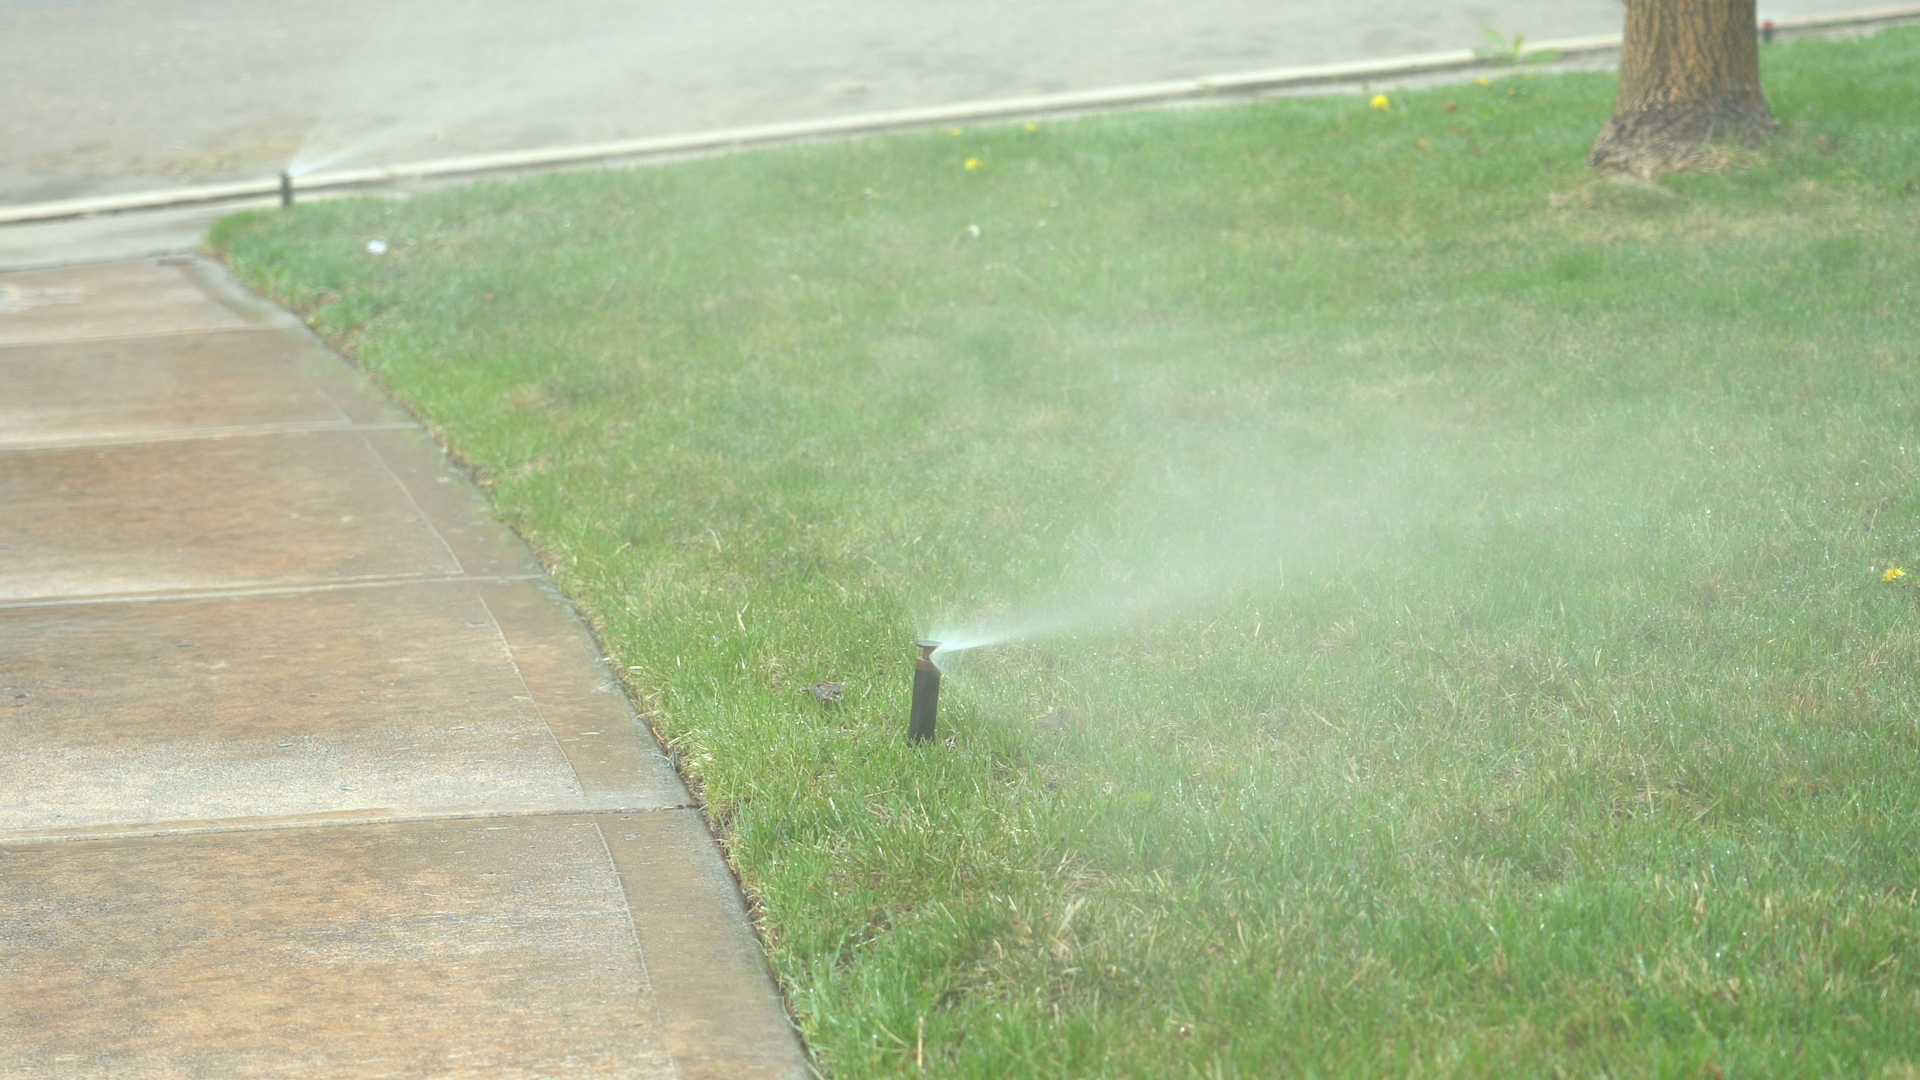 Making the switch to high-efficiency sprinkler heads